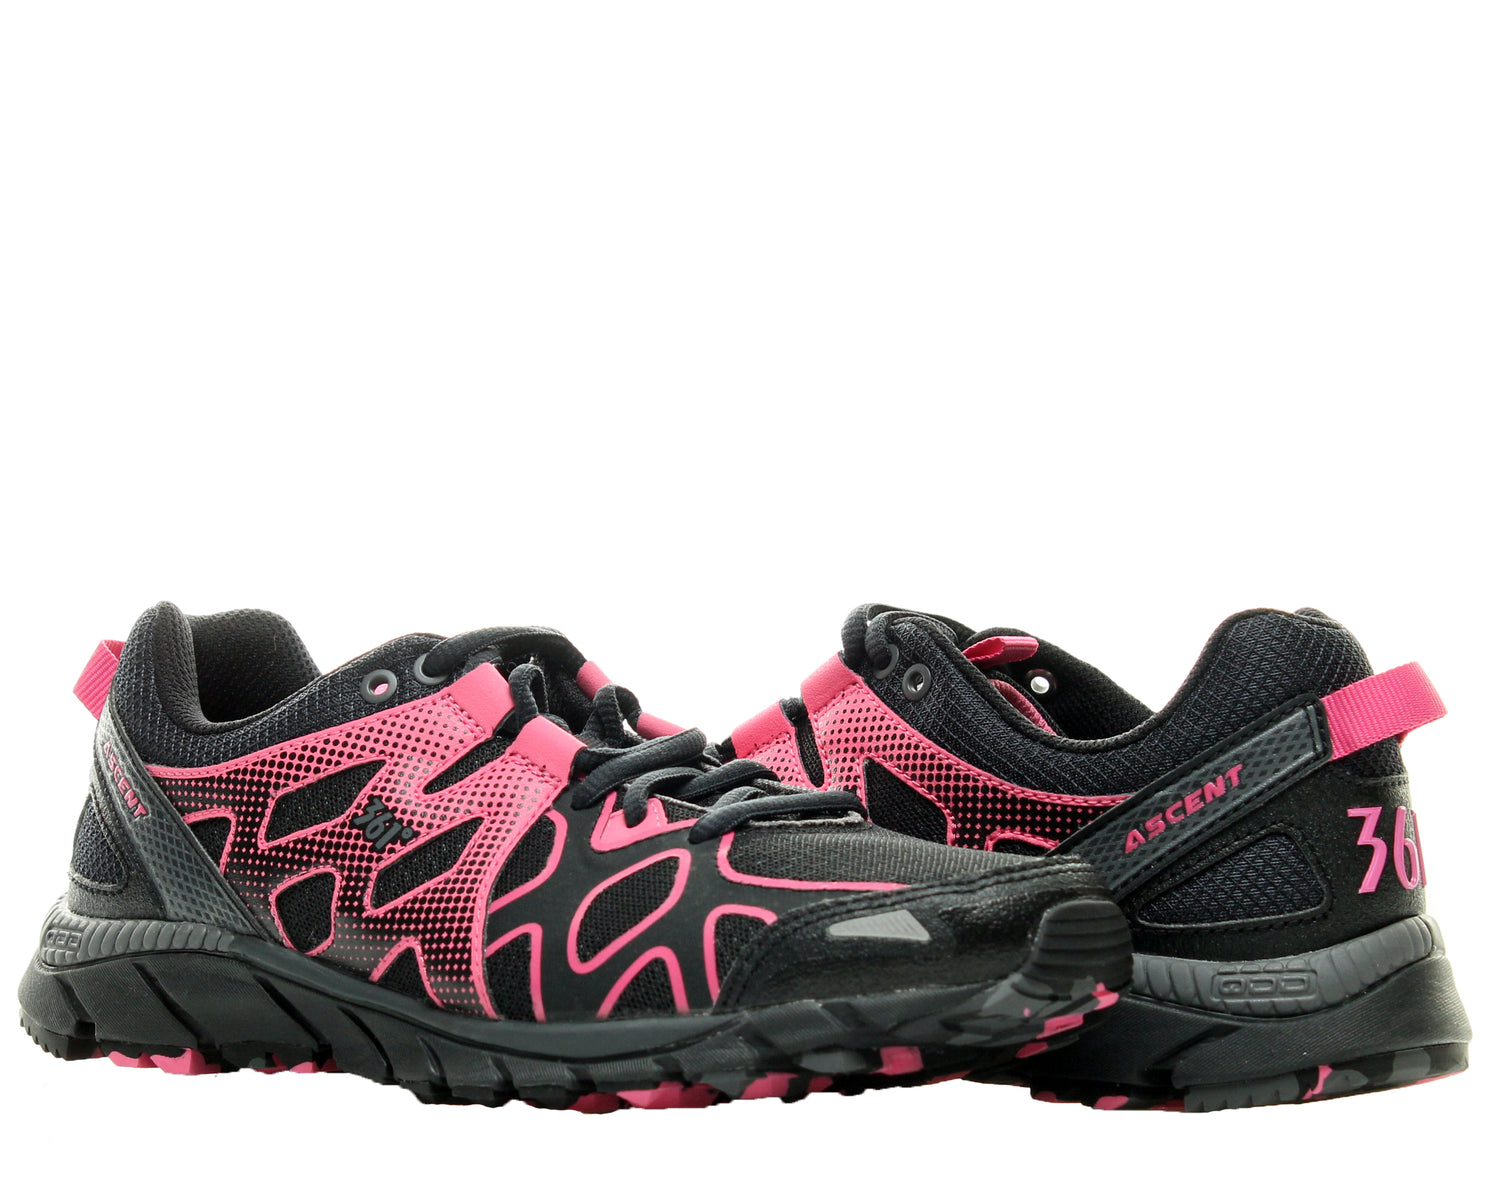 361° Ascent Women's Trail Running Shoes